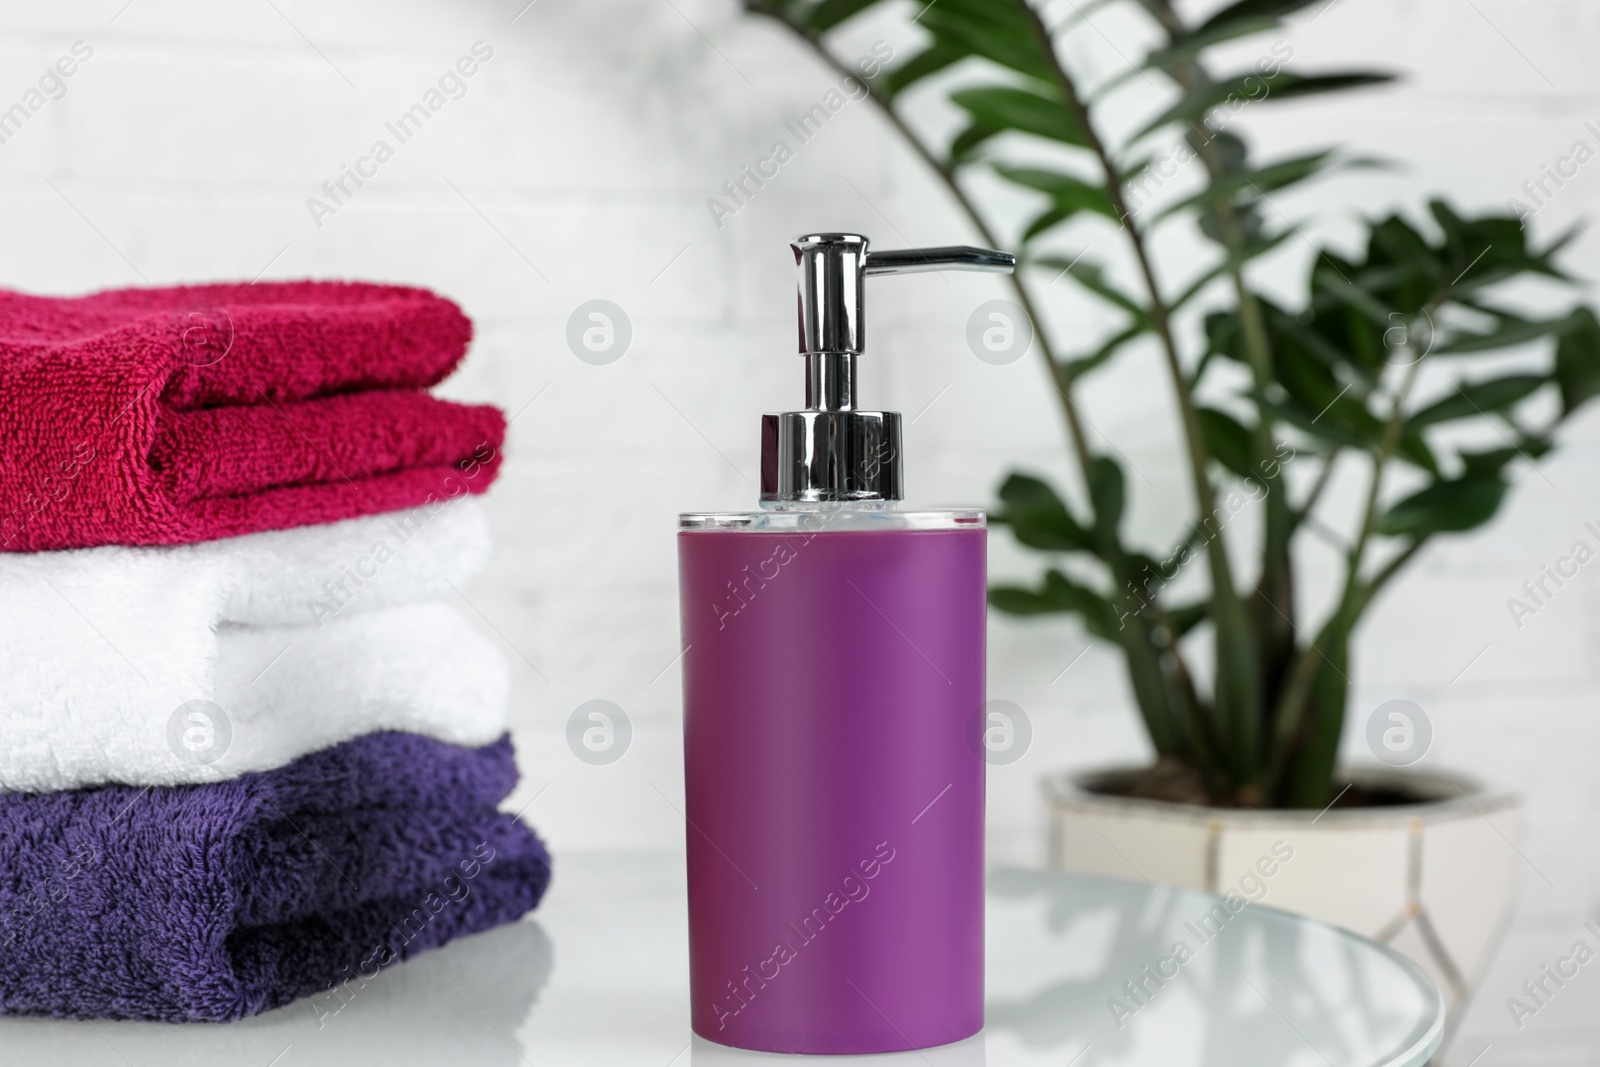 Photo of Bottle of liquid soap and towels on table